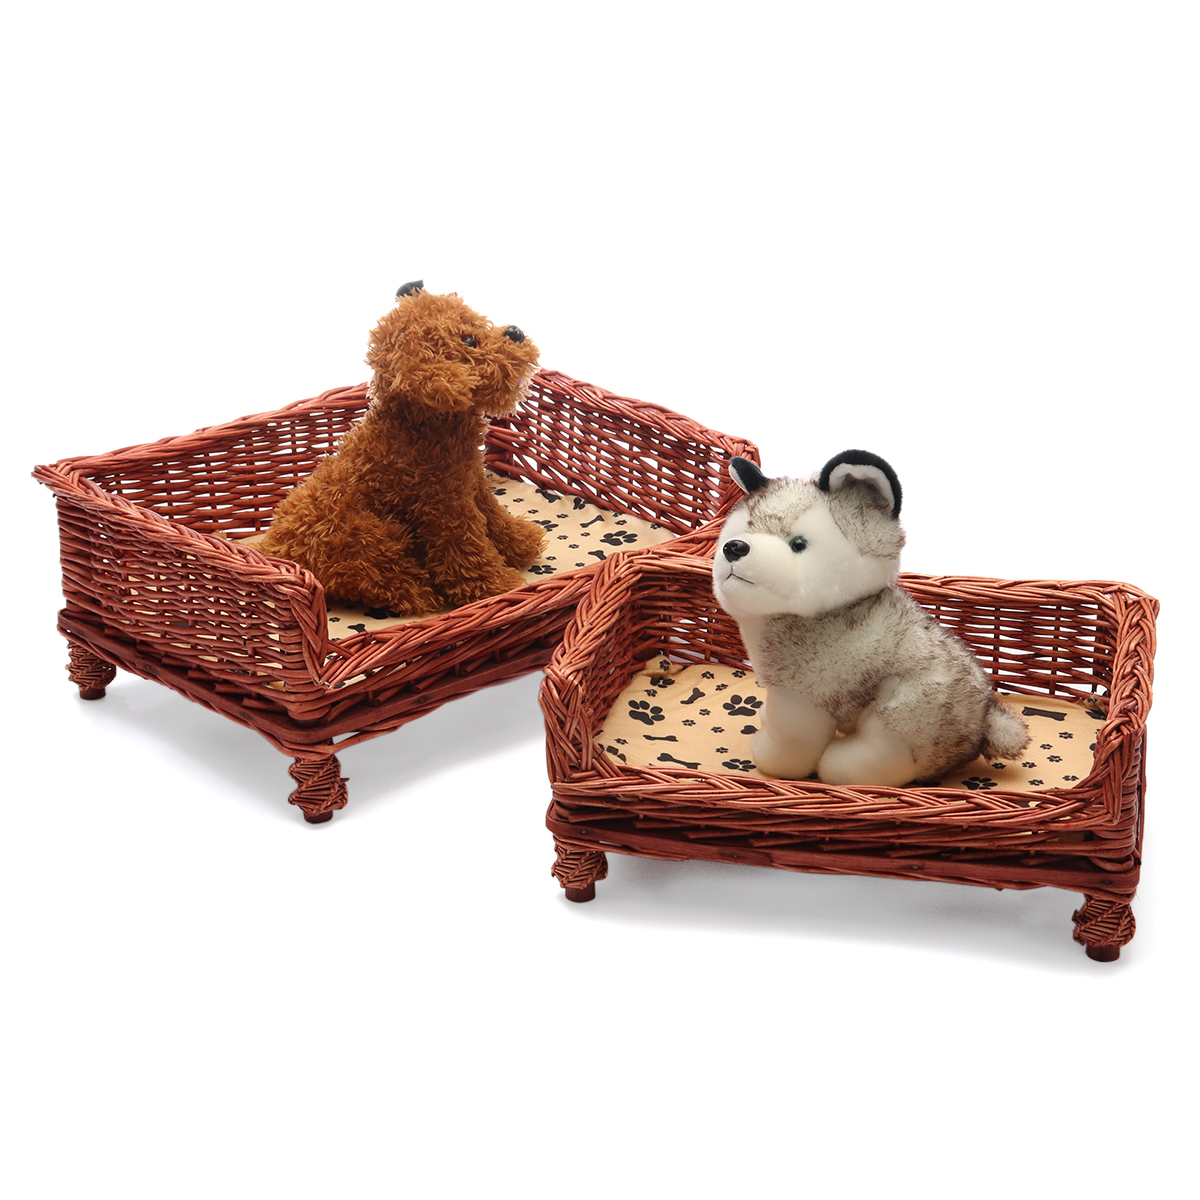 HAND-WOVEN-Wicker-Pet-Bed-Dog-Cat-Basket-Shabby-Chic-Sleeping-Durable-Washable-1640468-3